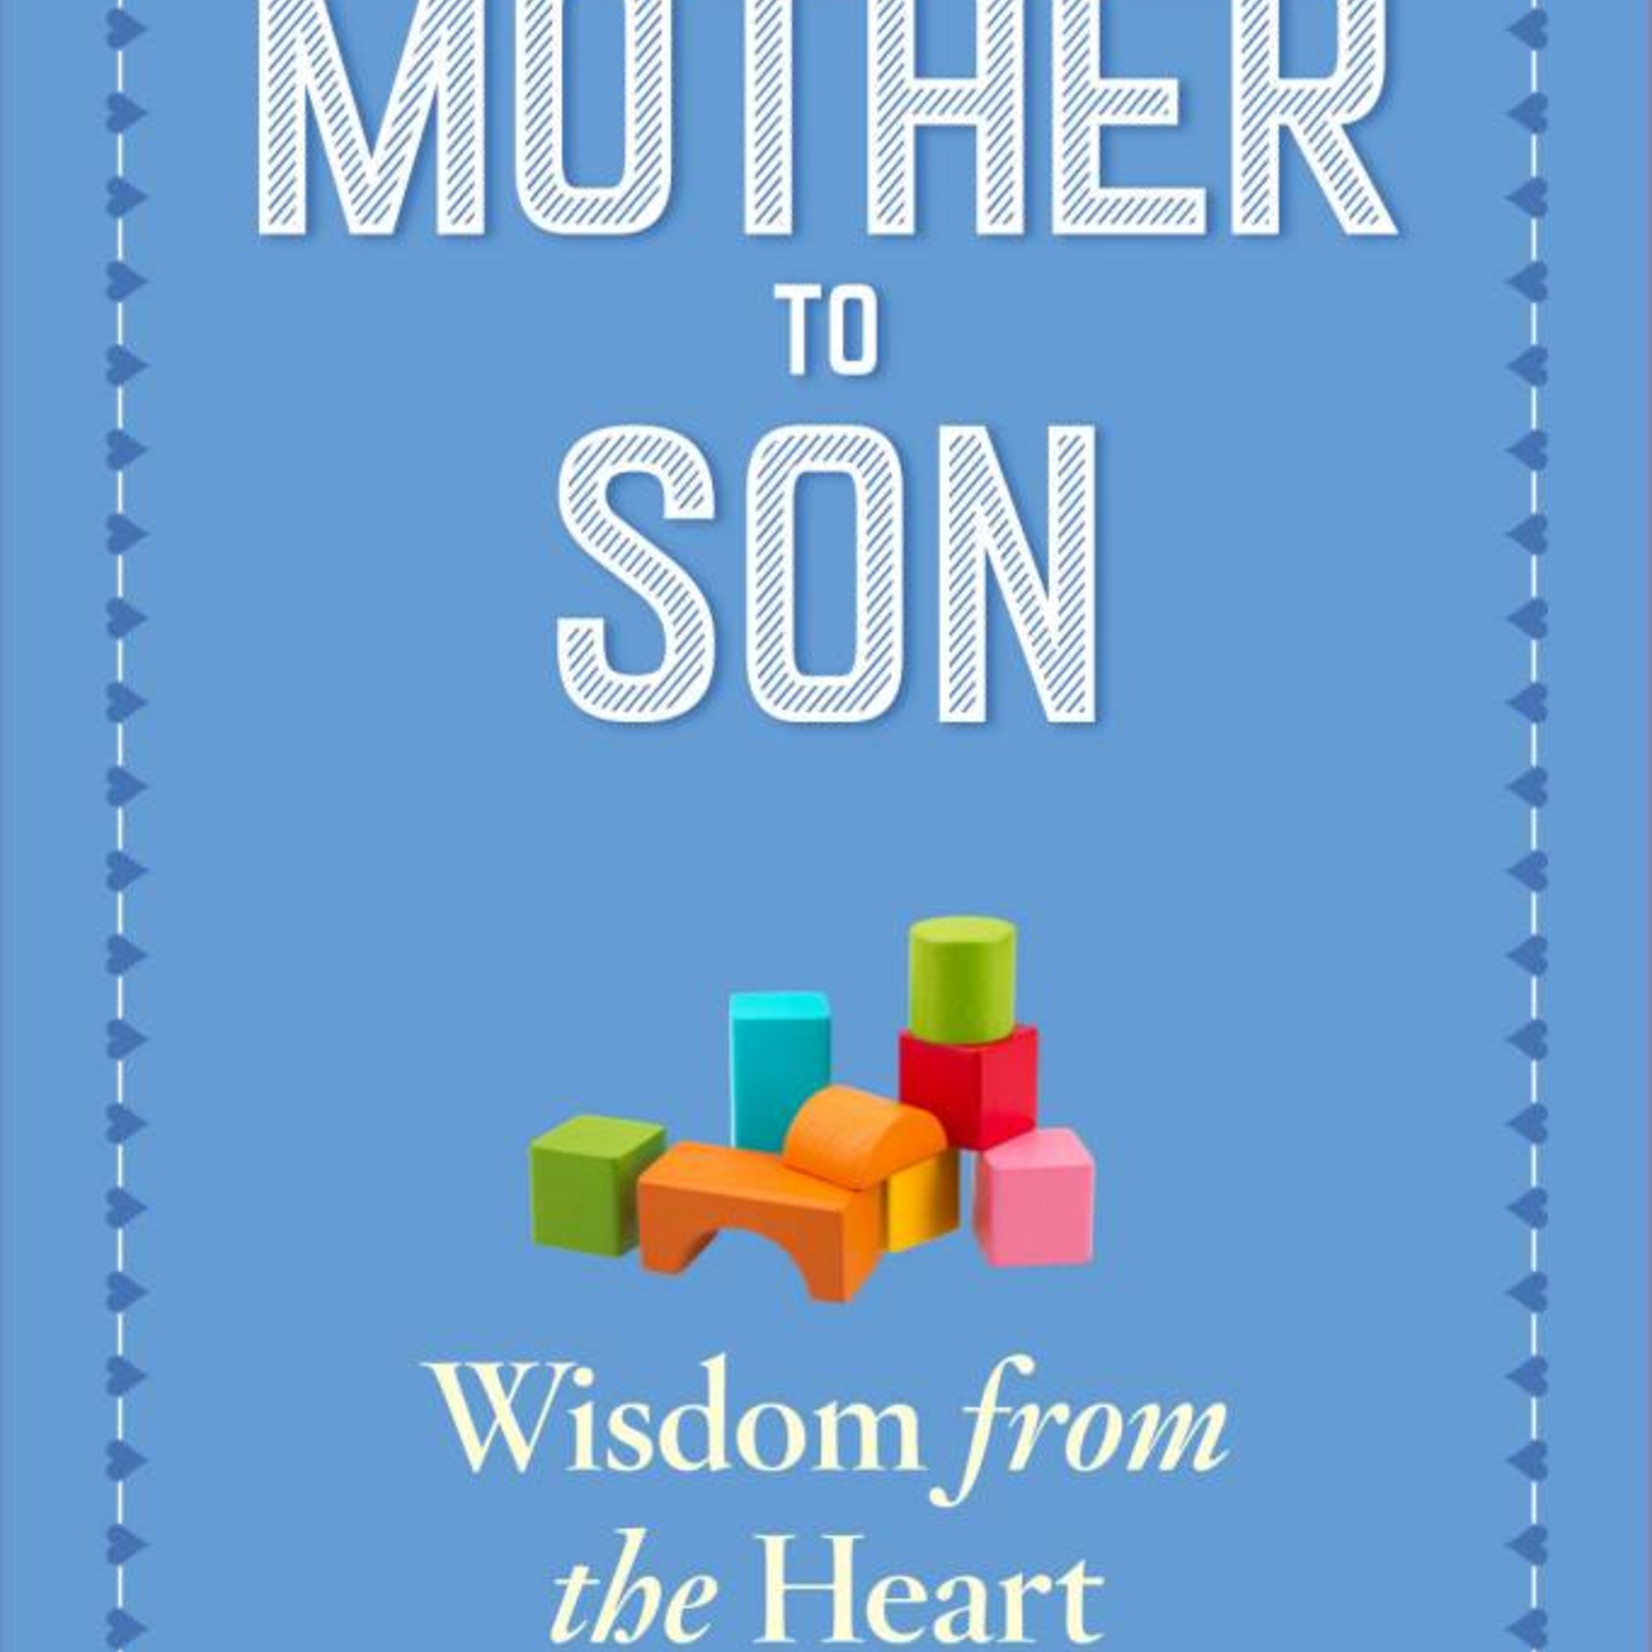 Hachette Book Group Mother To Son